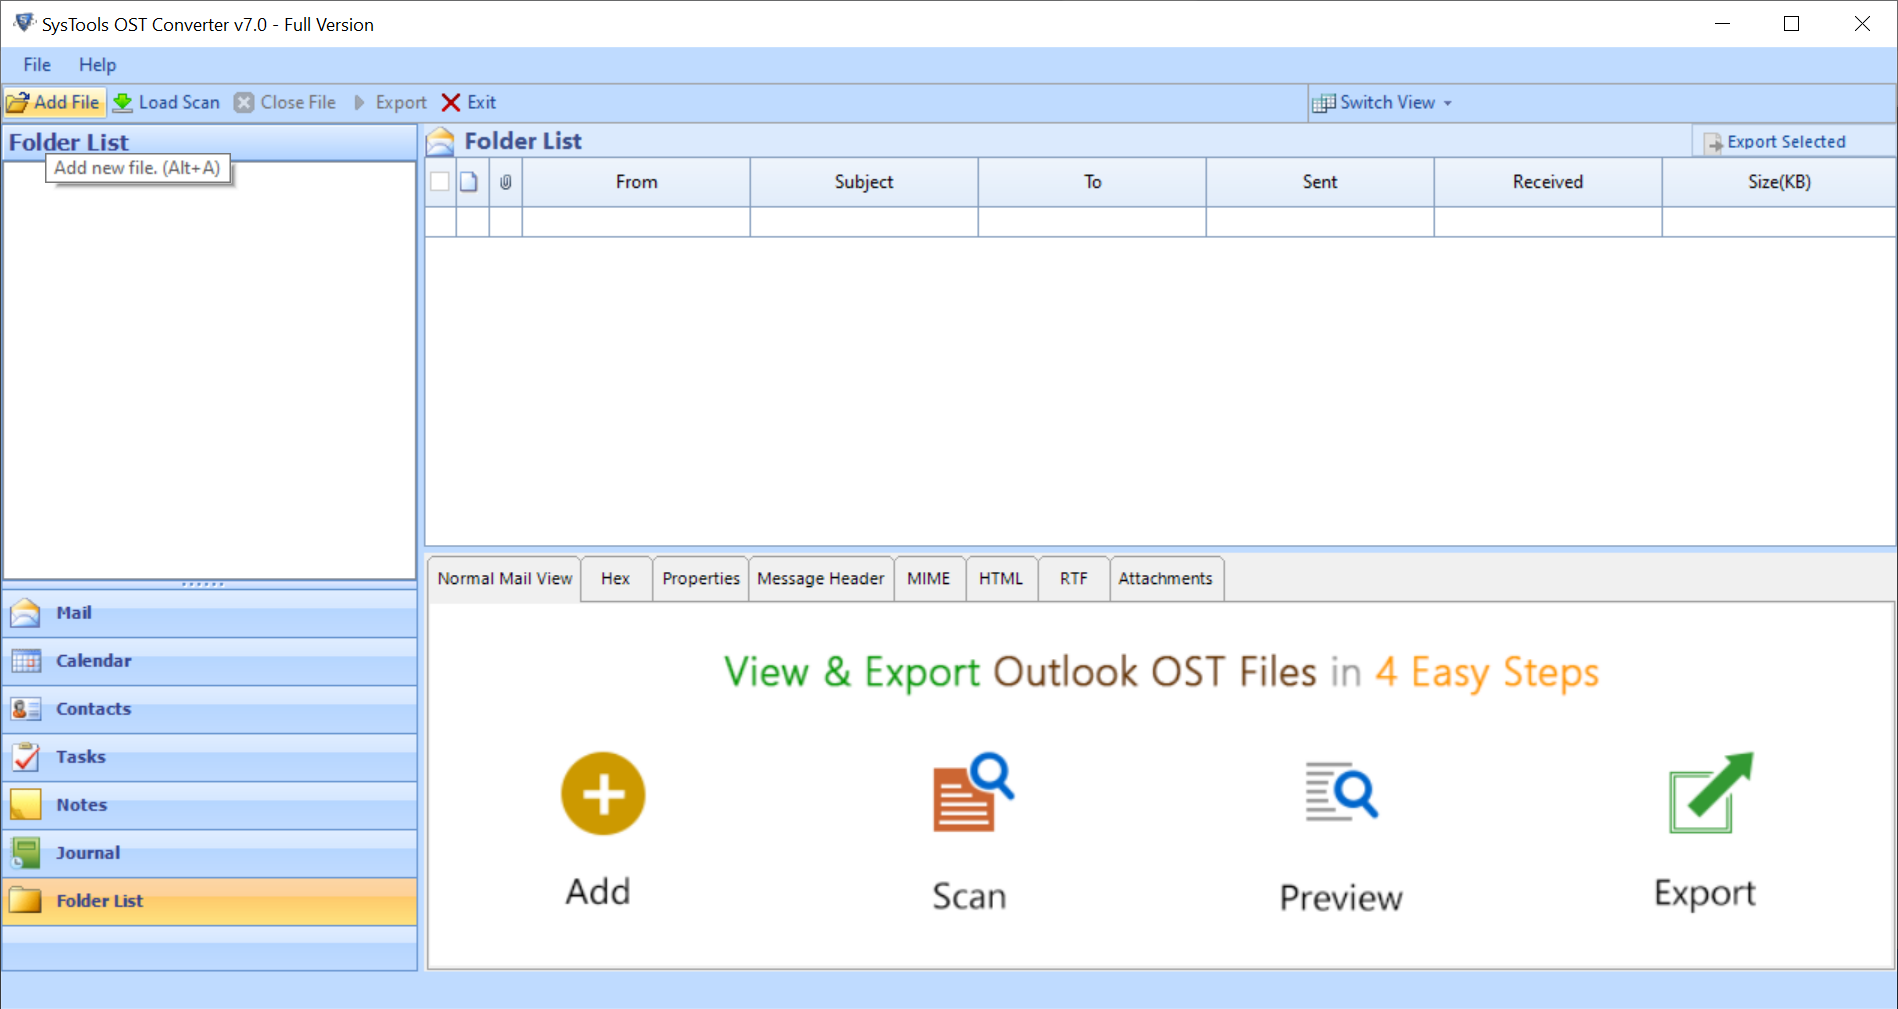 Select One Export Option and Click on Export Button